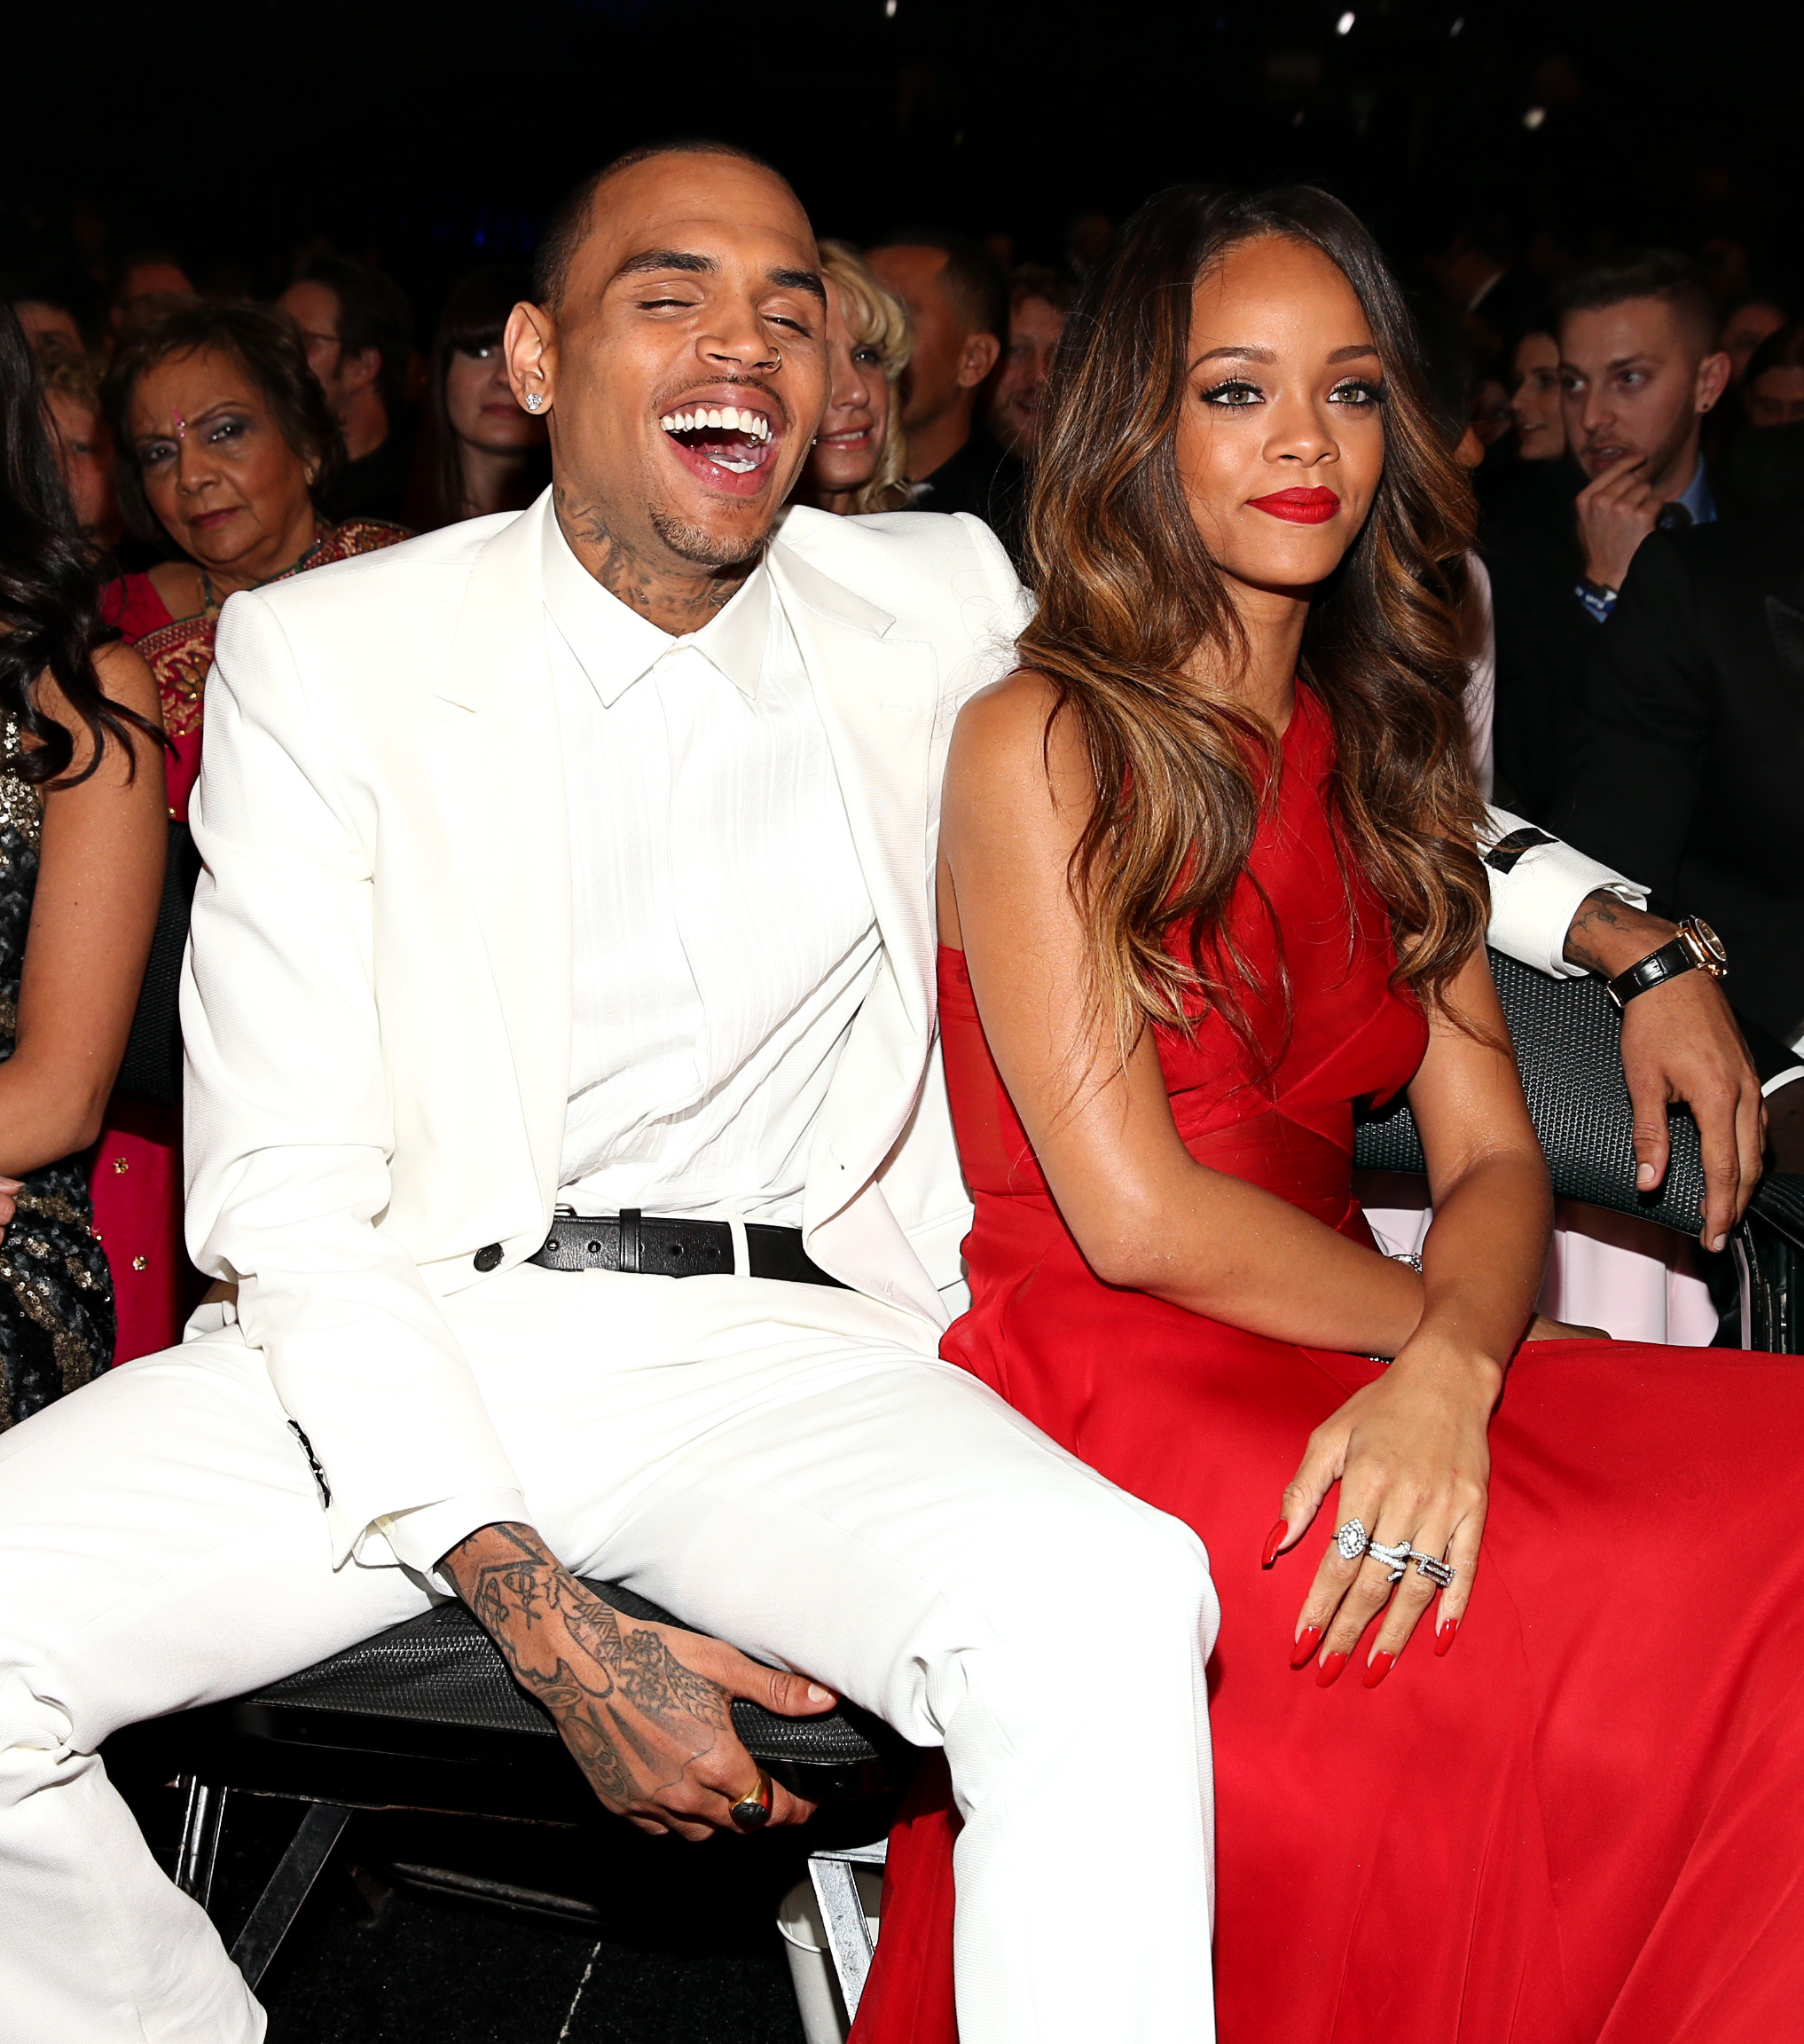 Chris Brown Follows Rihanna On IG Moments After Her Split With Hassan Jameel